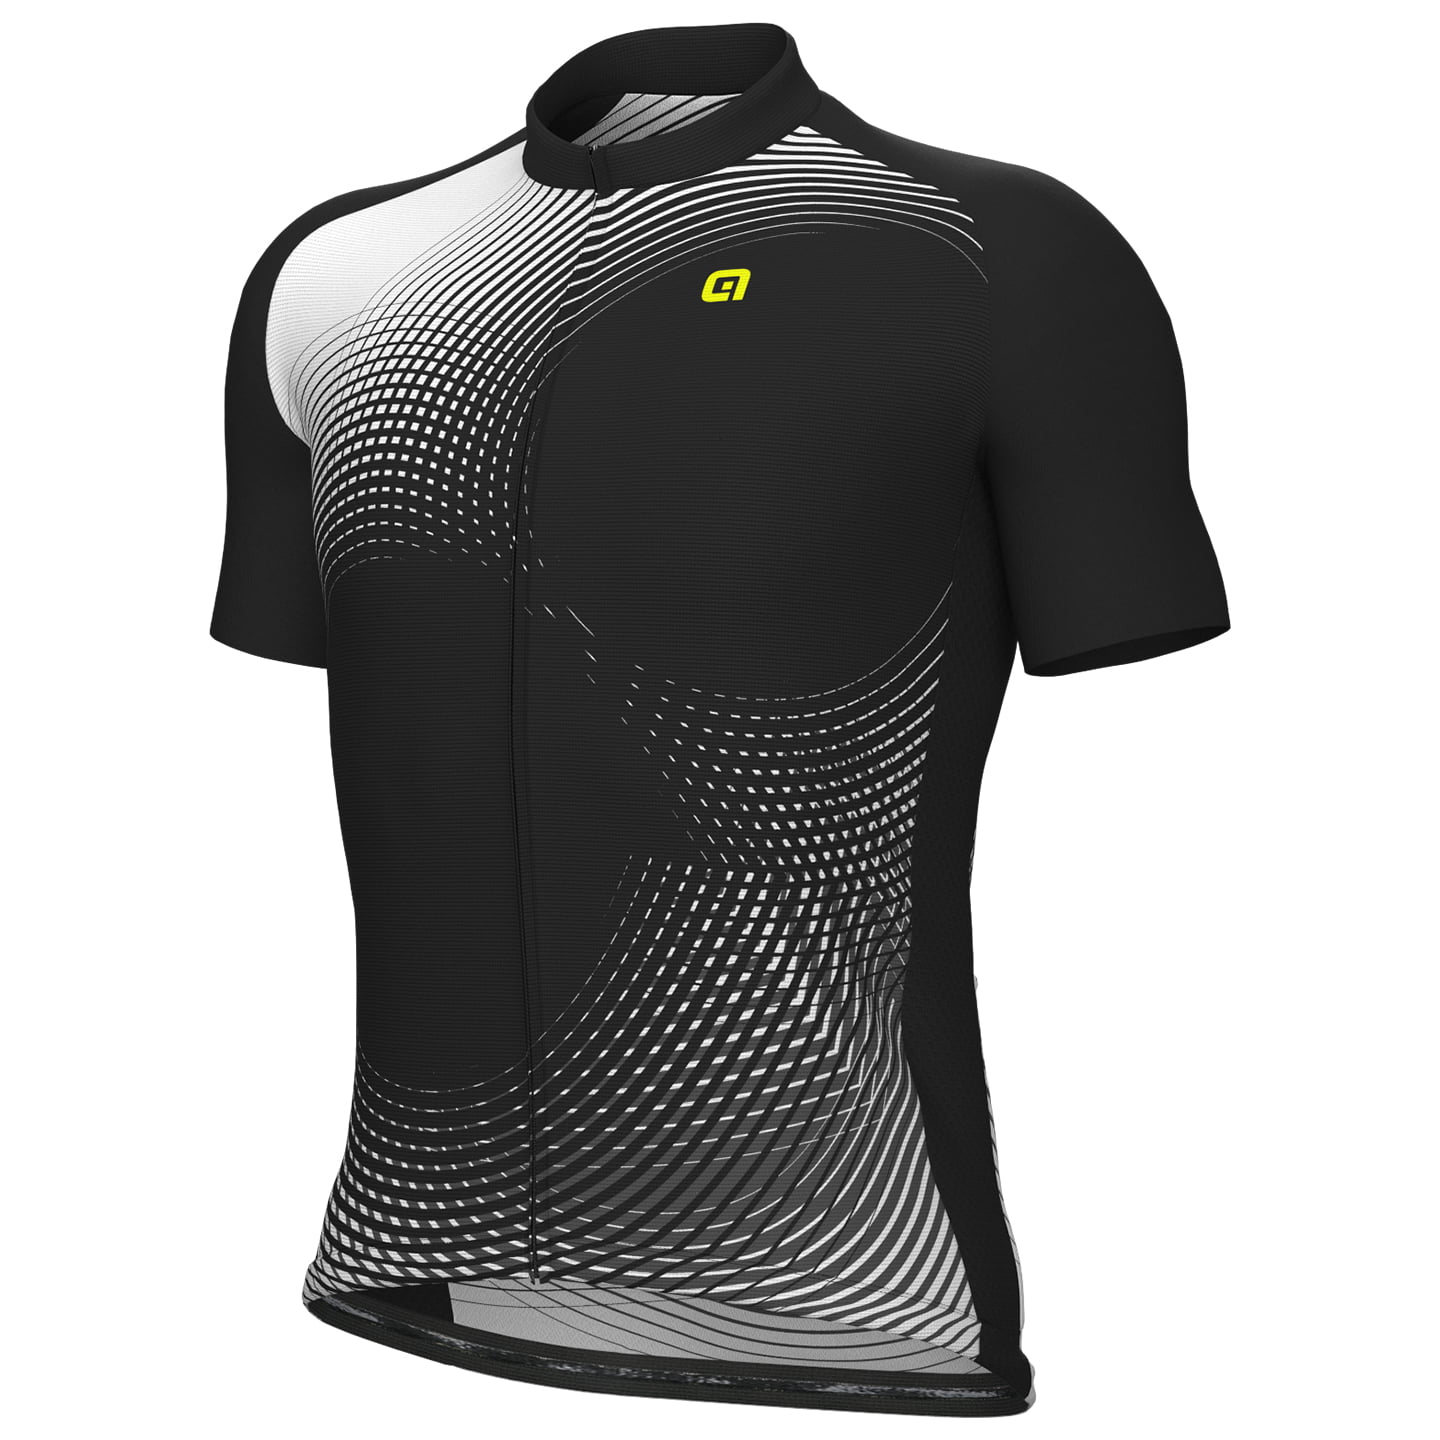 ALE Optical Short Sleeve Jersey, for men, size M, Cycling jersey, Cycling clothing